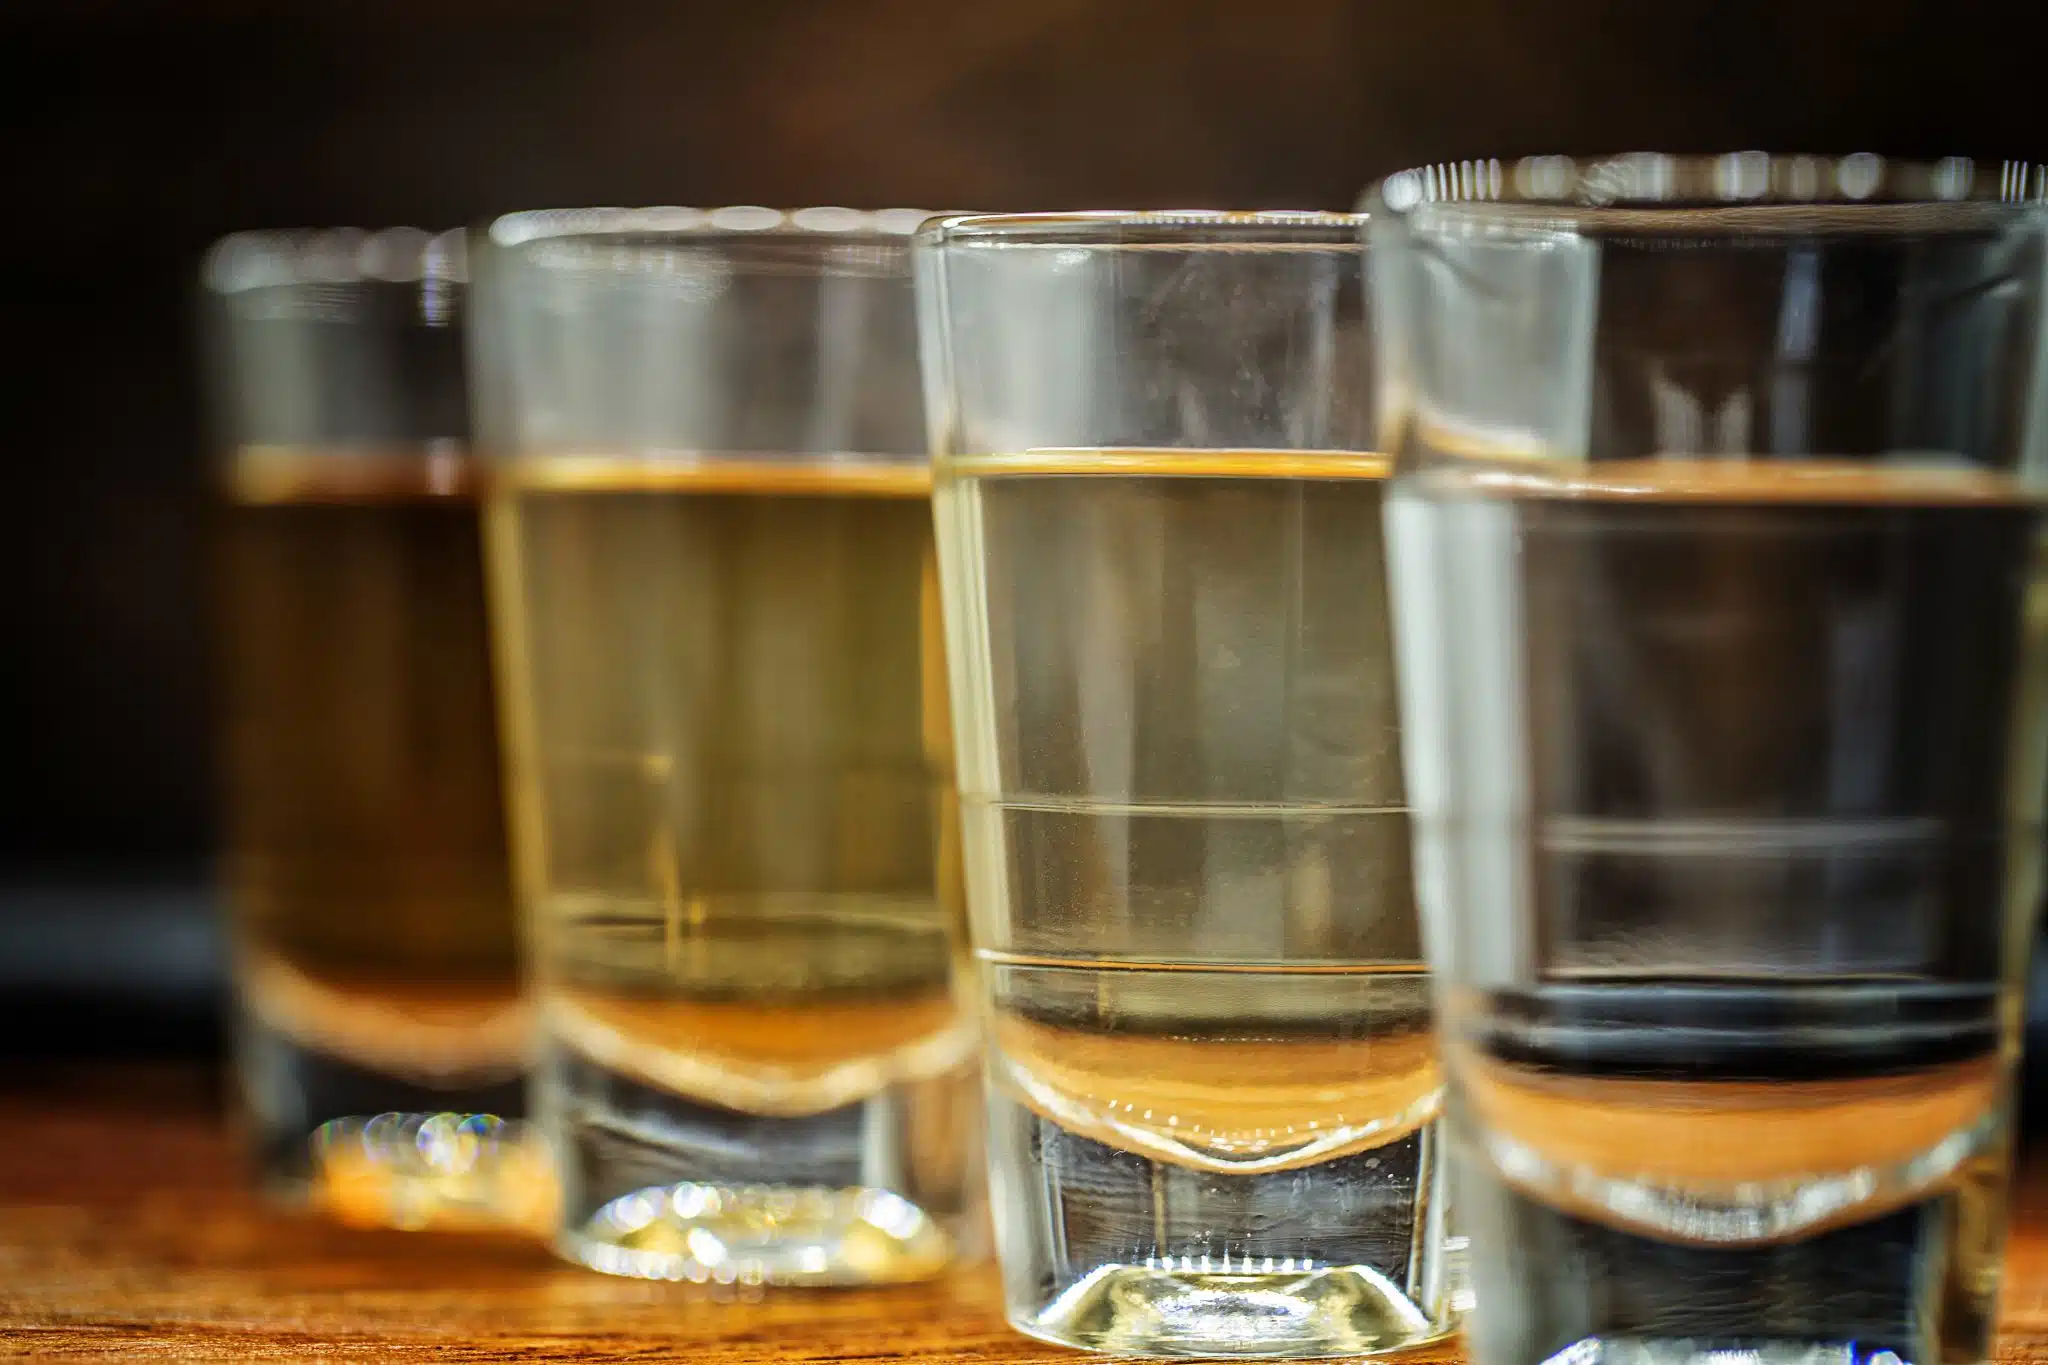 Several small glasses filled with golden liquid, lined up on a wooden surface with a dark background, likely containing cachaça, a Brazilian spirit.